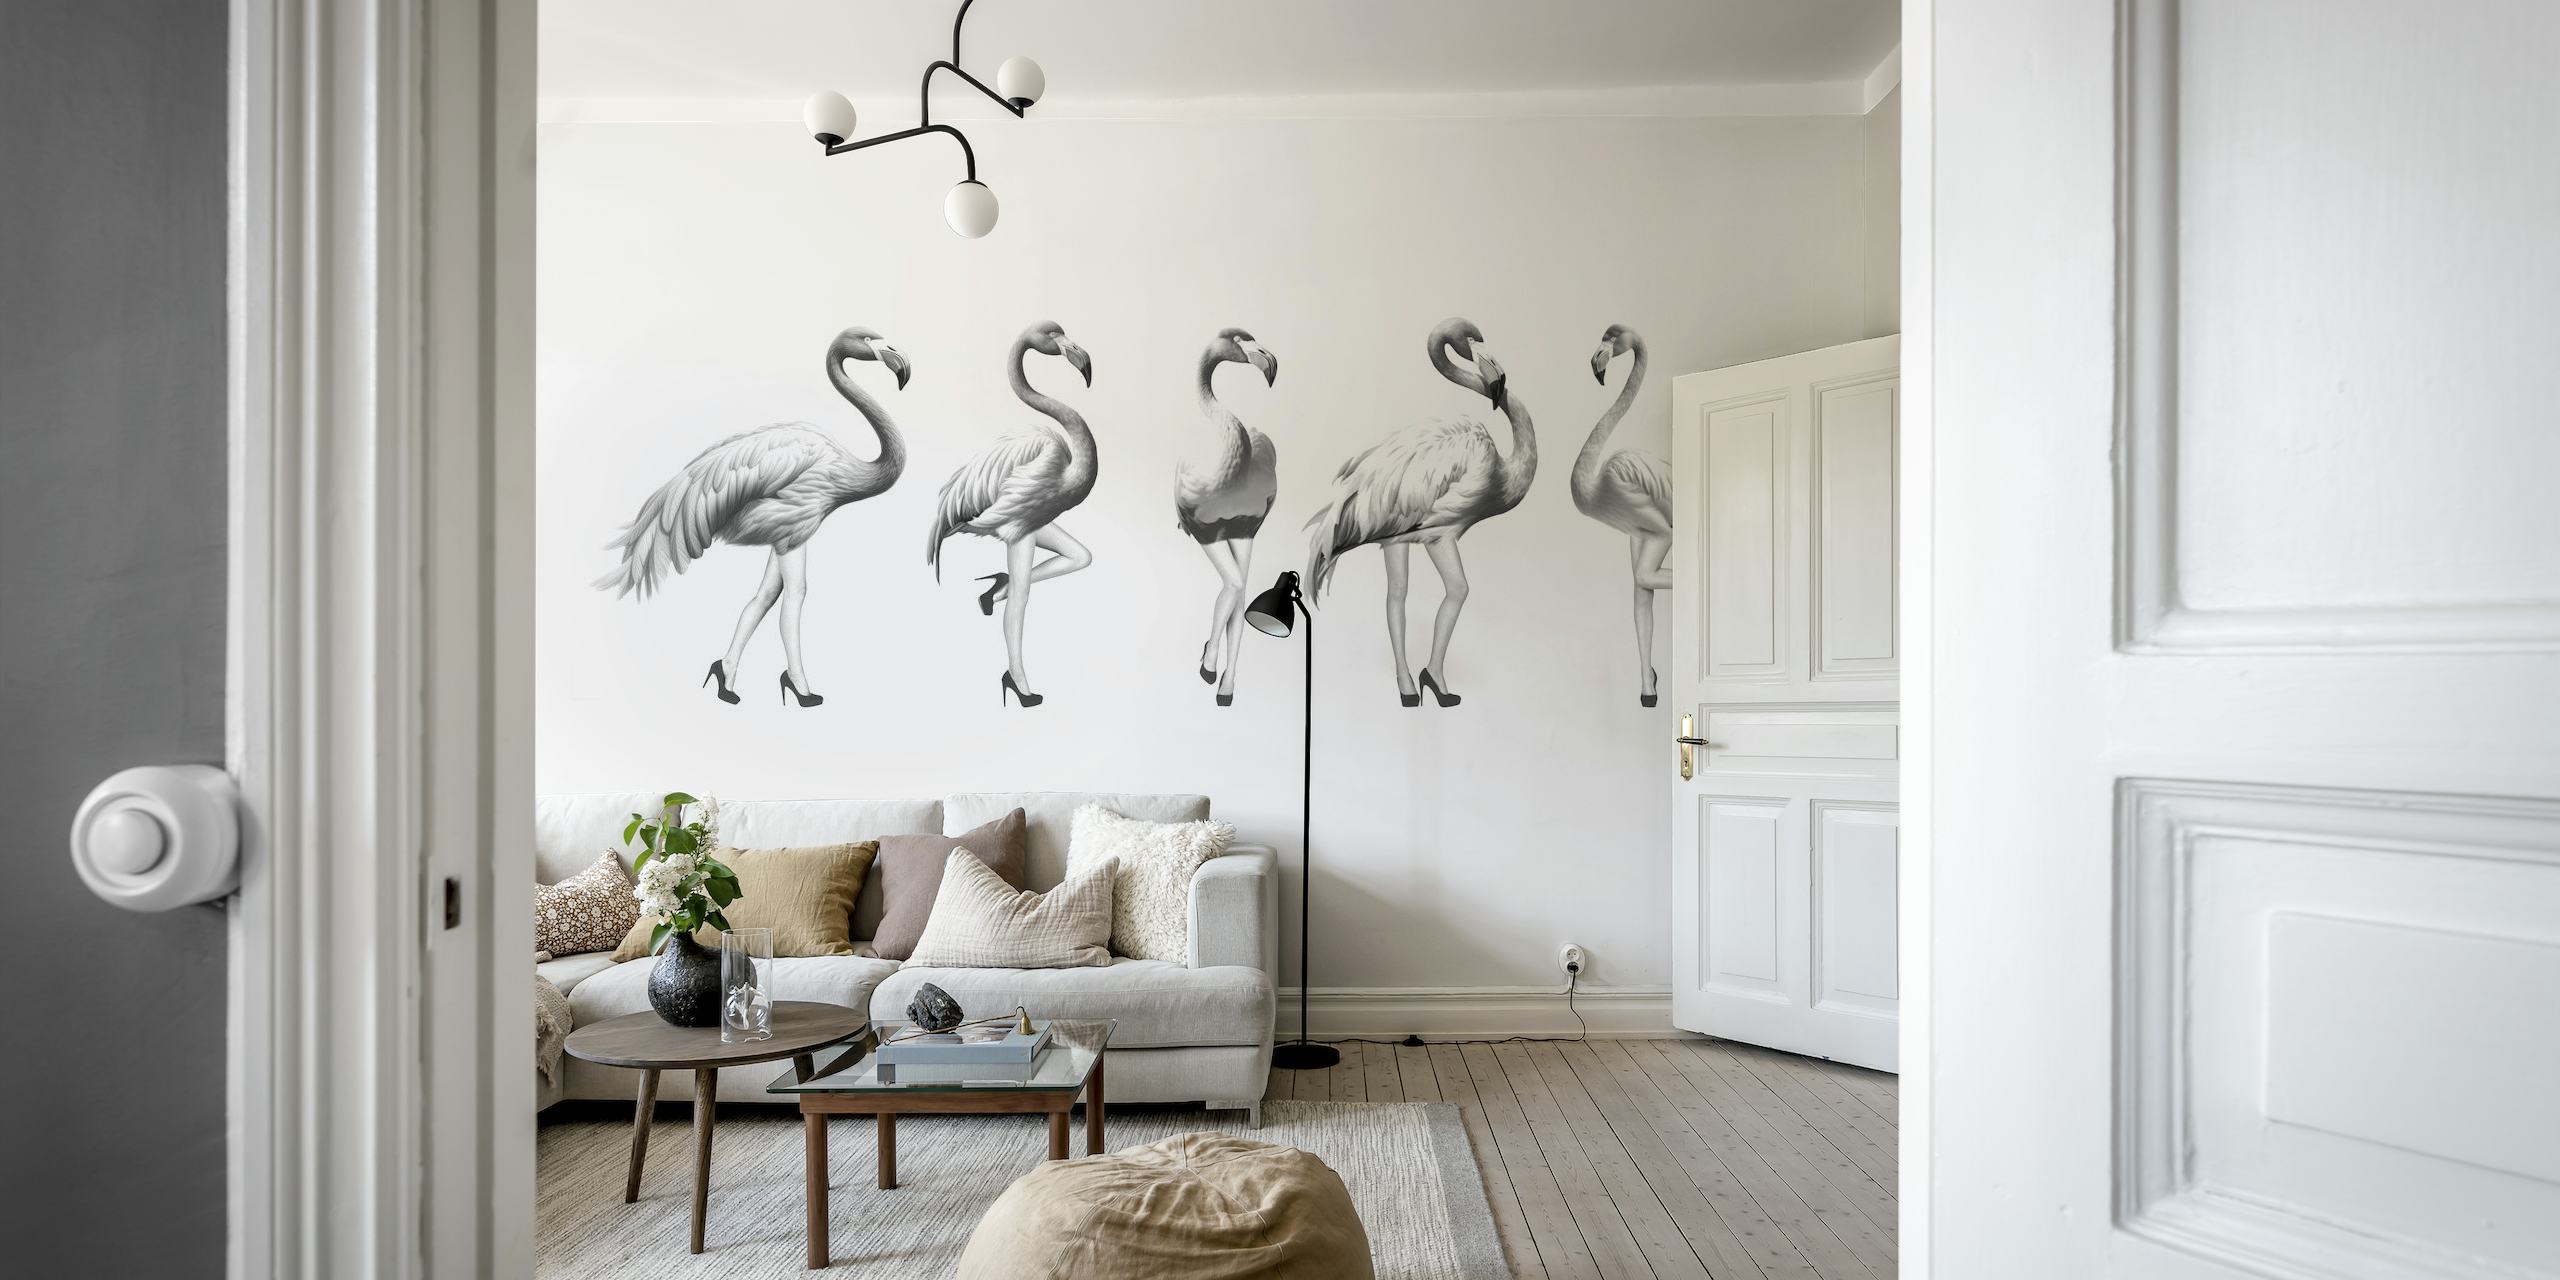 Black and white wall mural of playful flamingos in grey shades